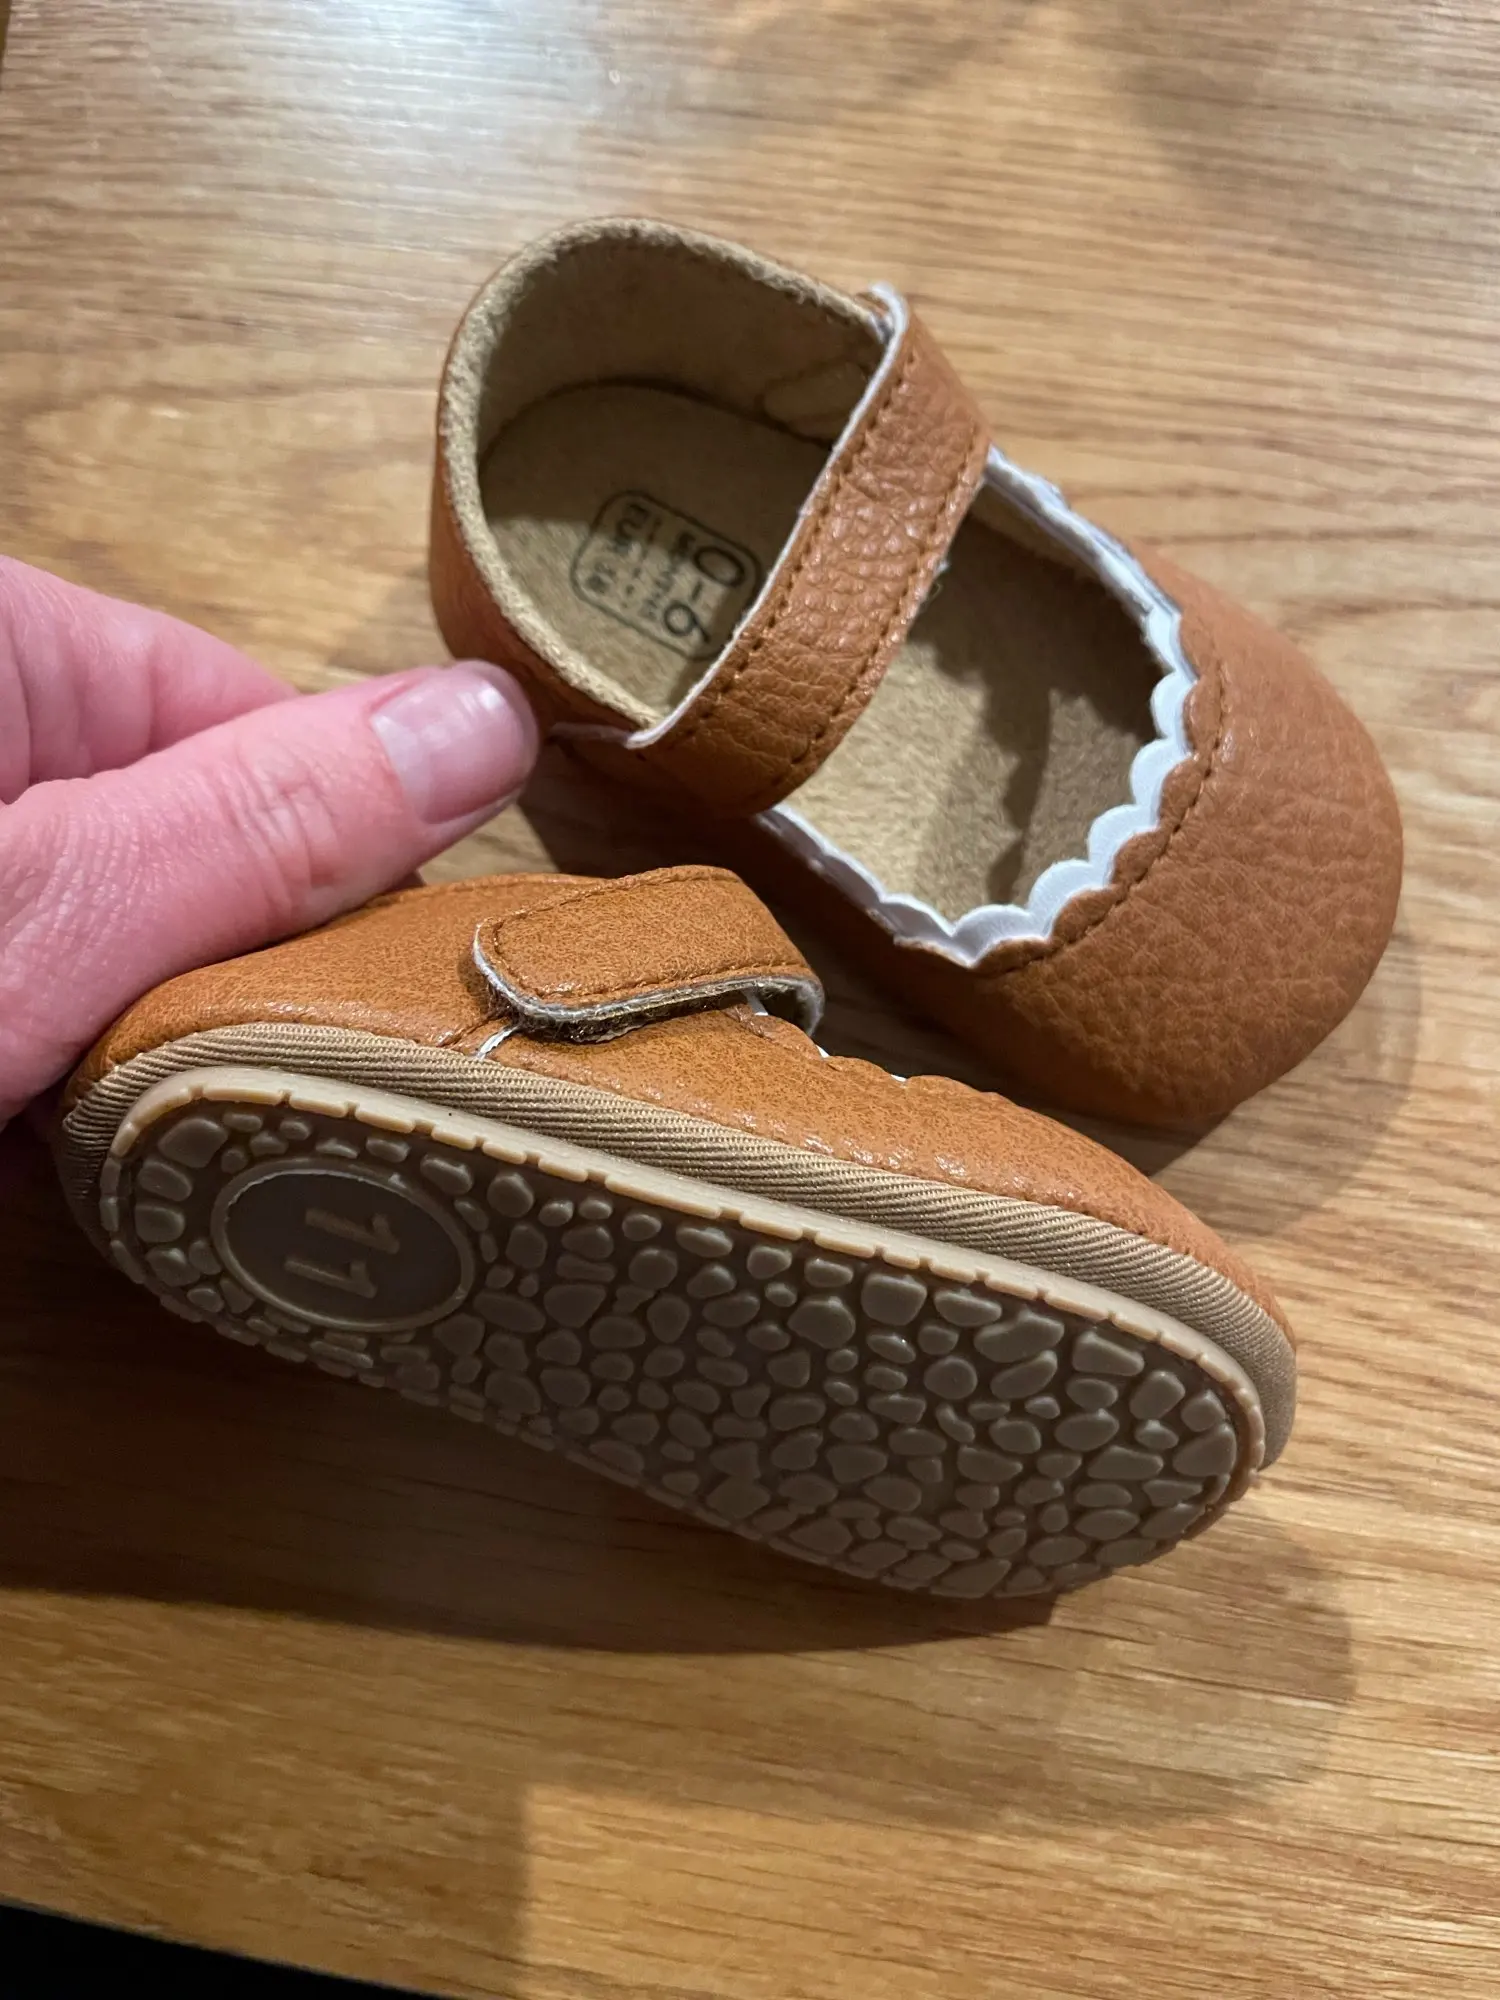 New Baby Shoes Baby Boy Girl Shoes Leather Rubber Sole Anti-slip Toddler First Walkers Infant Crib Shoes Newborn Girl Moccasins photo review